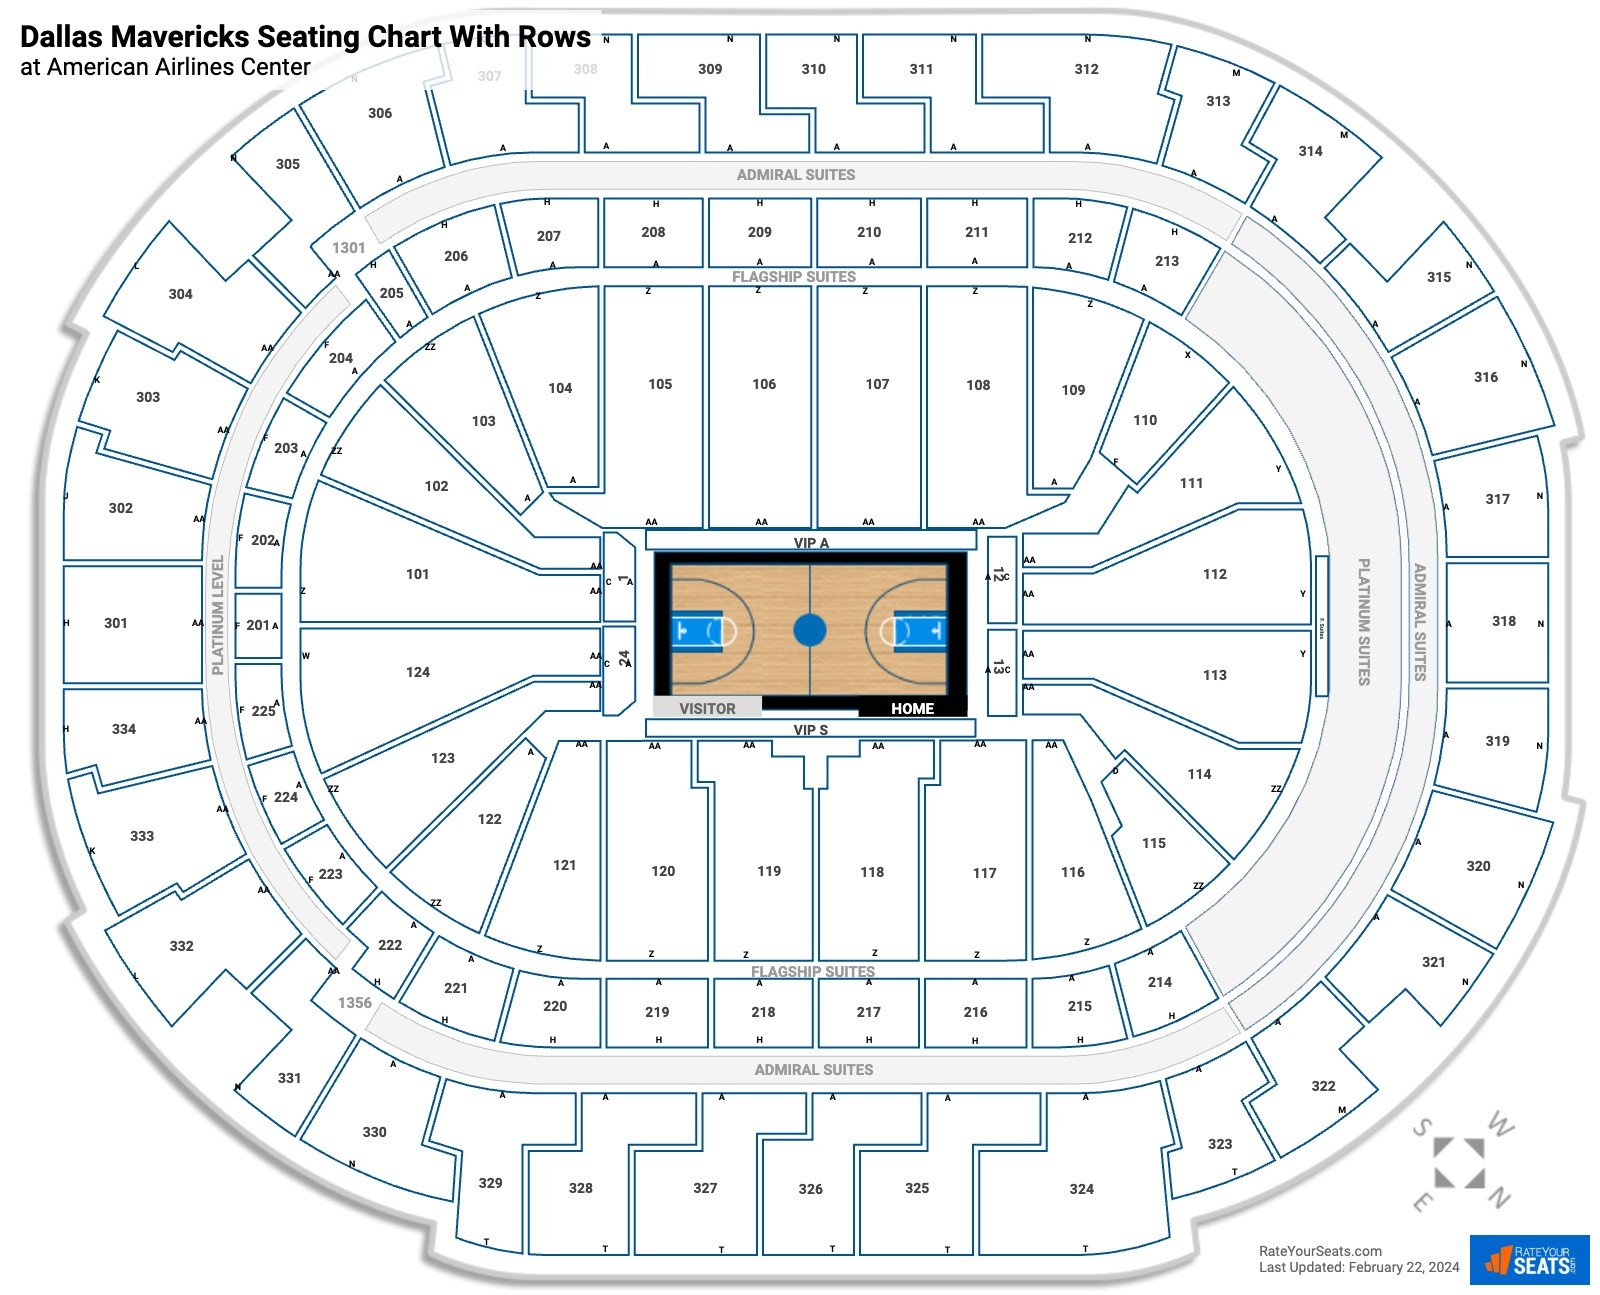 American Airlines Center seating chart with row numbers